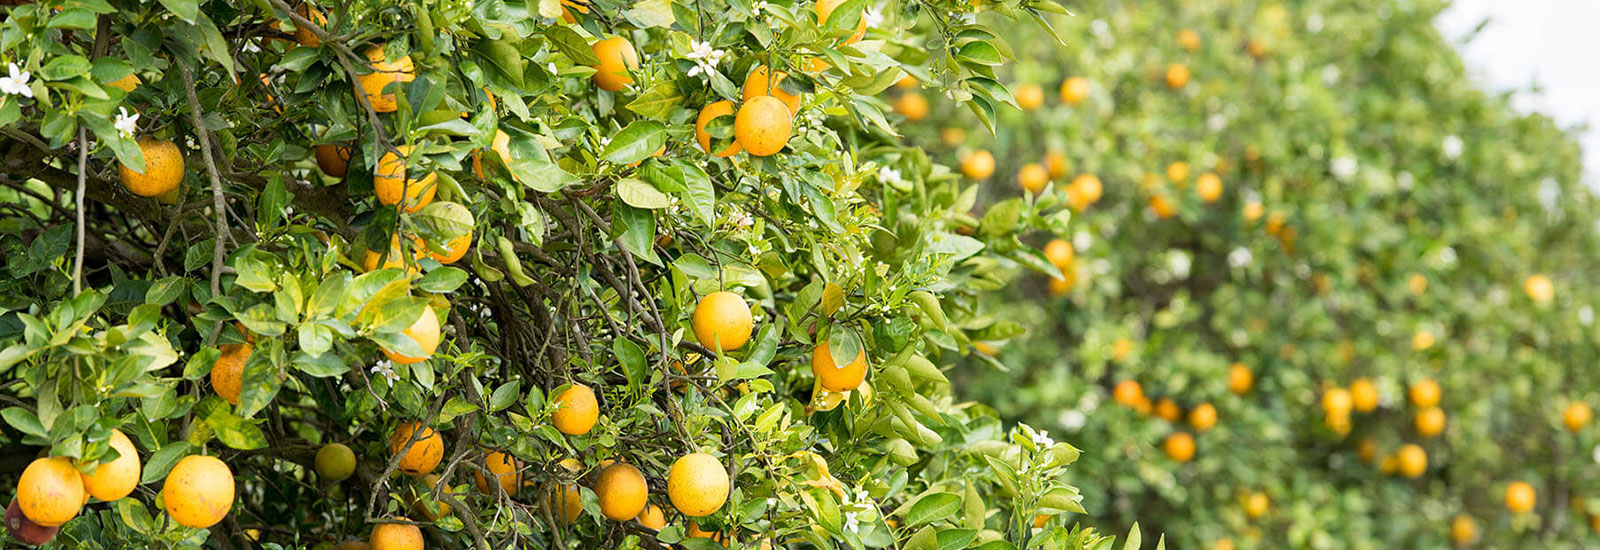 Contined funding for the mature citrus facility to produce disease tolerant, transgenic citrus.